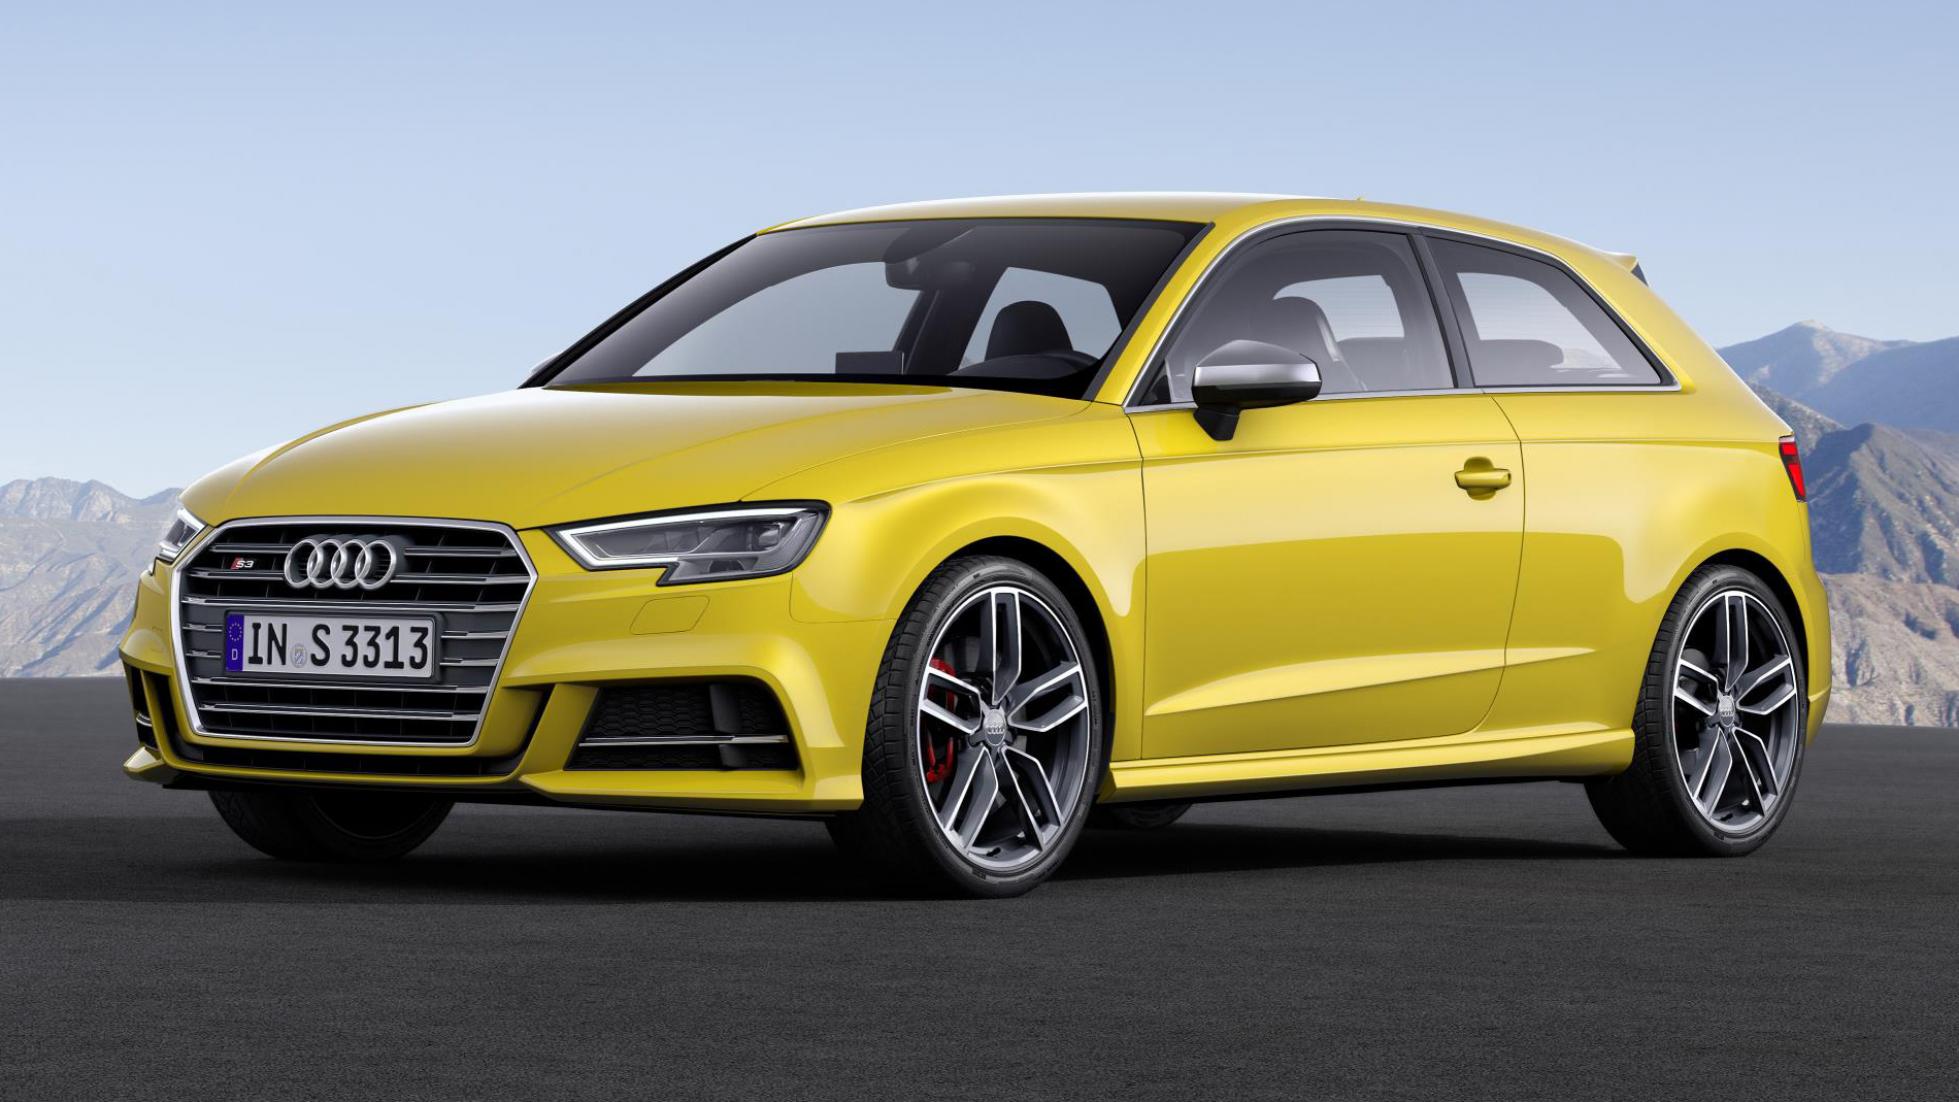 Audi updates A3 with Virtual Cockpit, more goodies